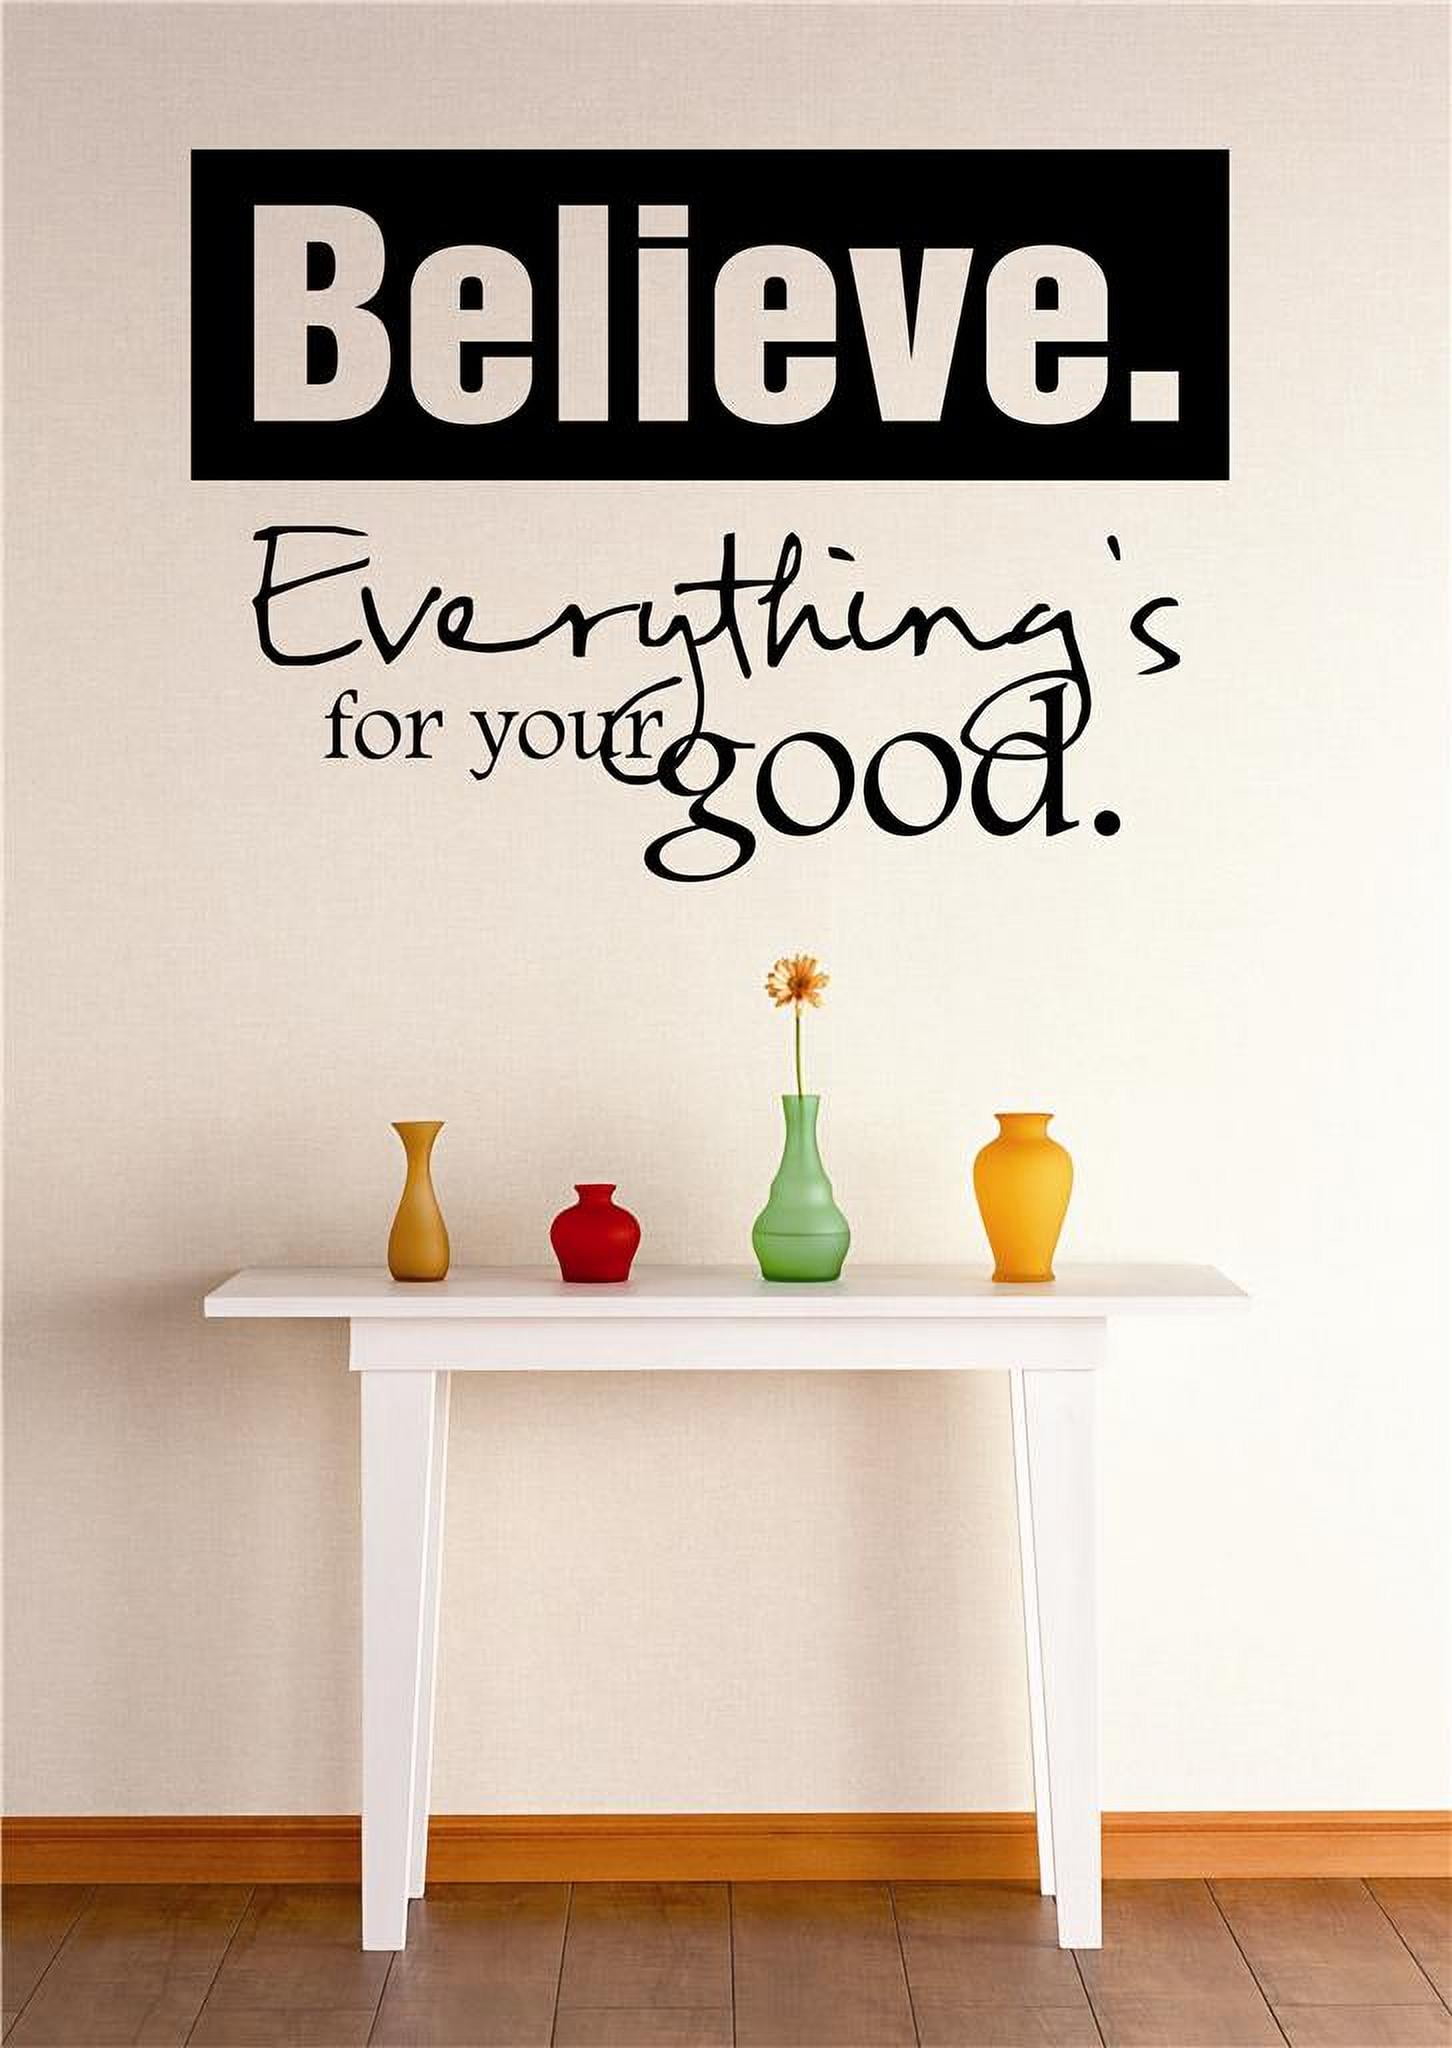 New Wall Ideas Believe Everythings for Your Good Inspirational Life Quote Design 16x24 Inches